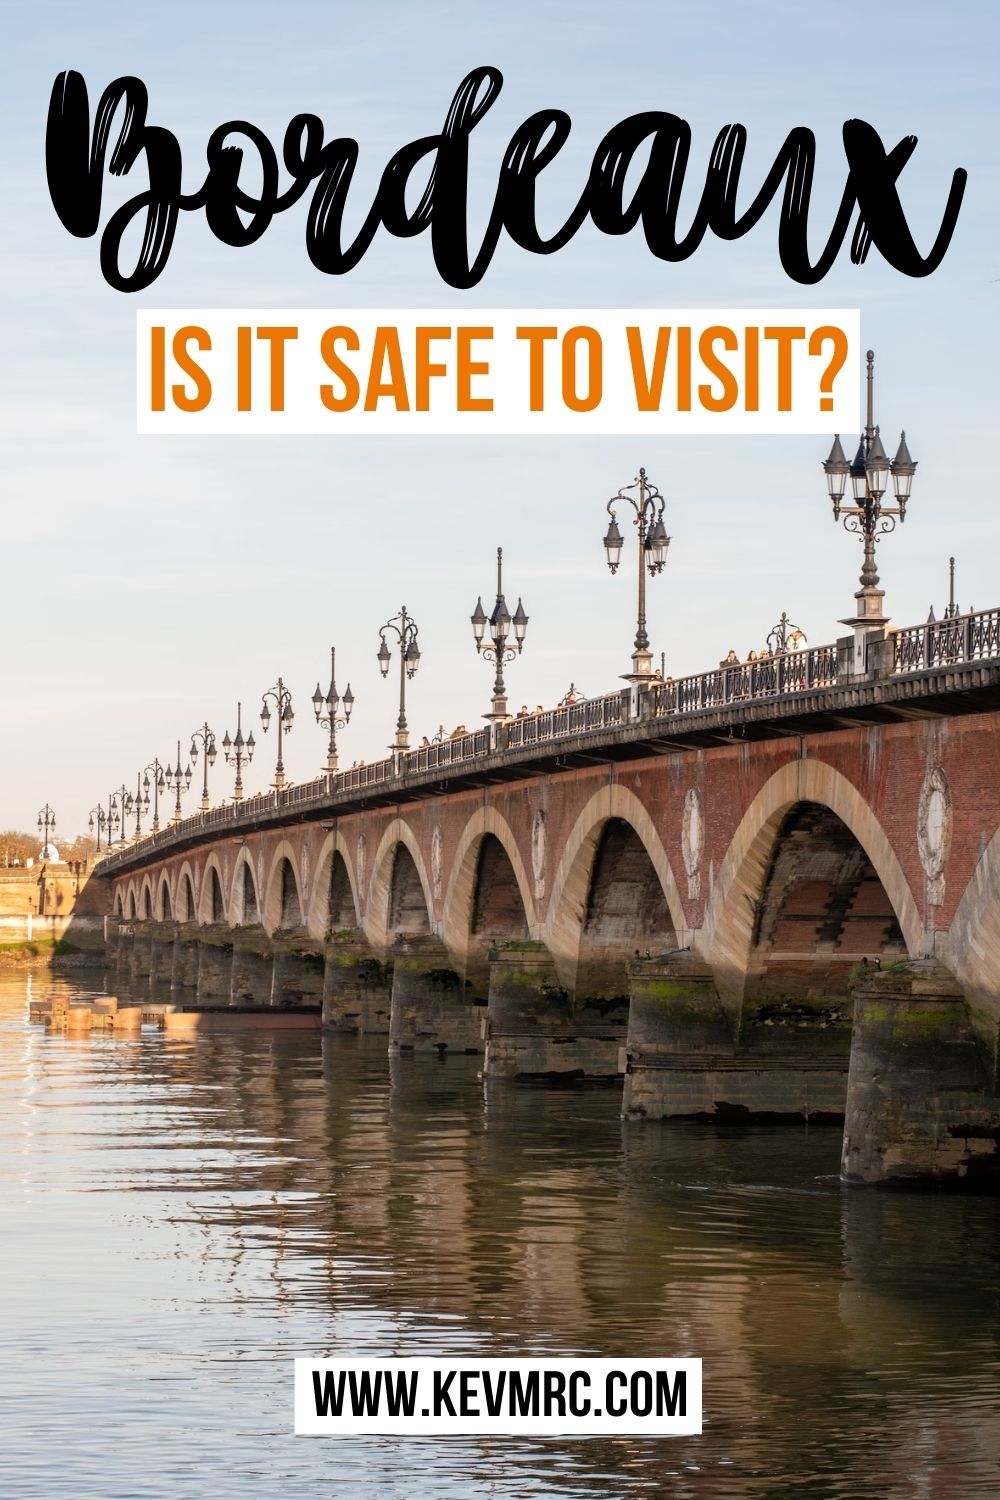 Is Bordeaux safe to visit? Discover the answer to this question in this complete guide, along with the areas to avoid and safety tips. bordeaux travel guide | visit bordeaux